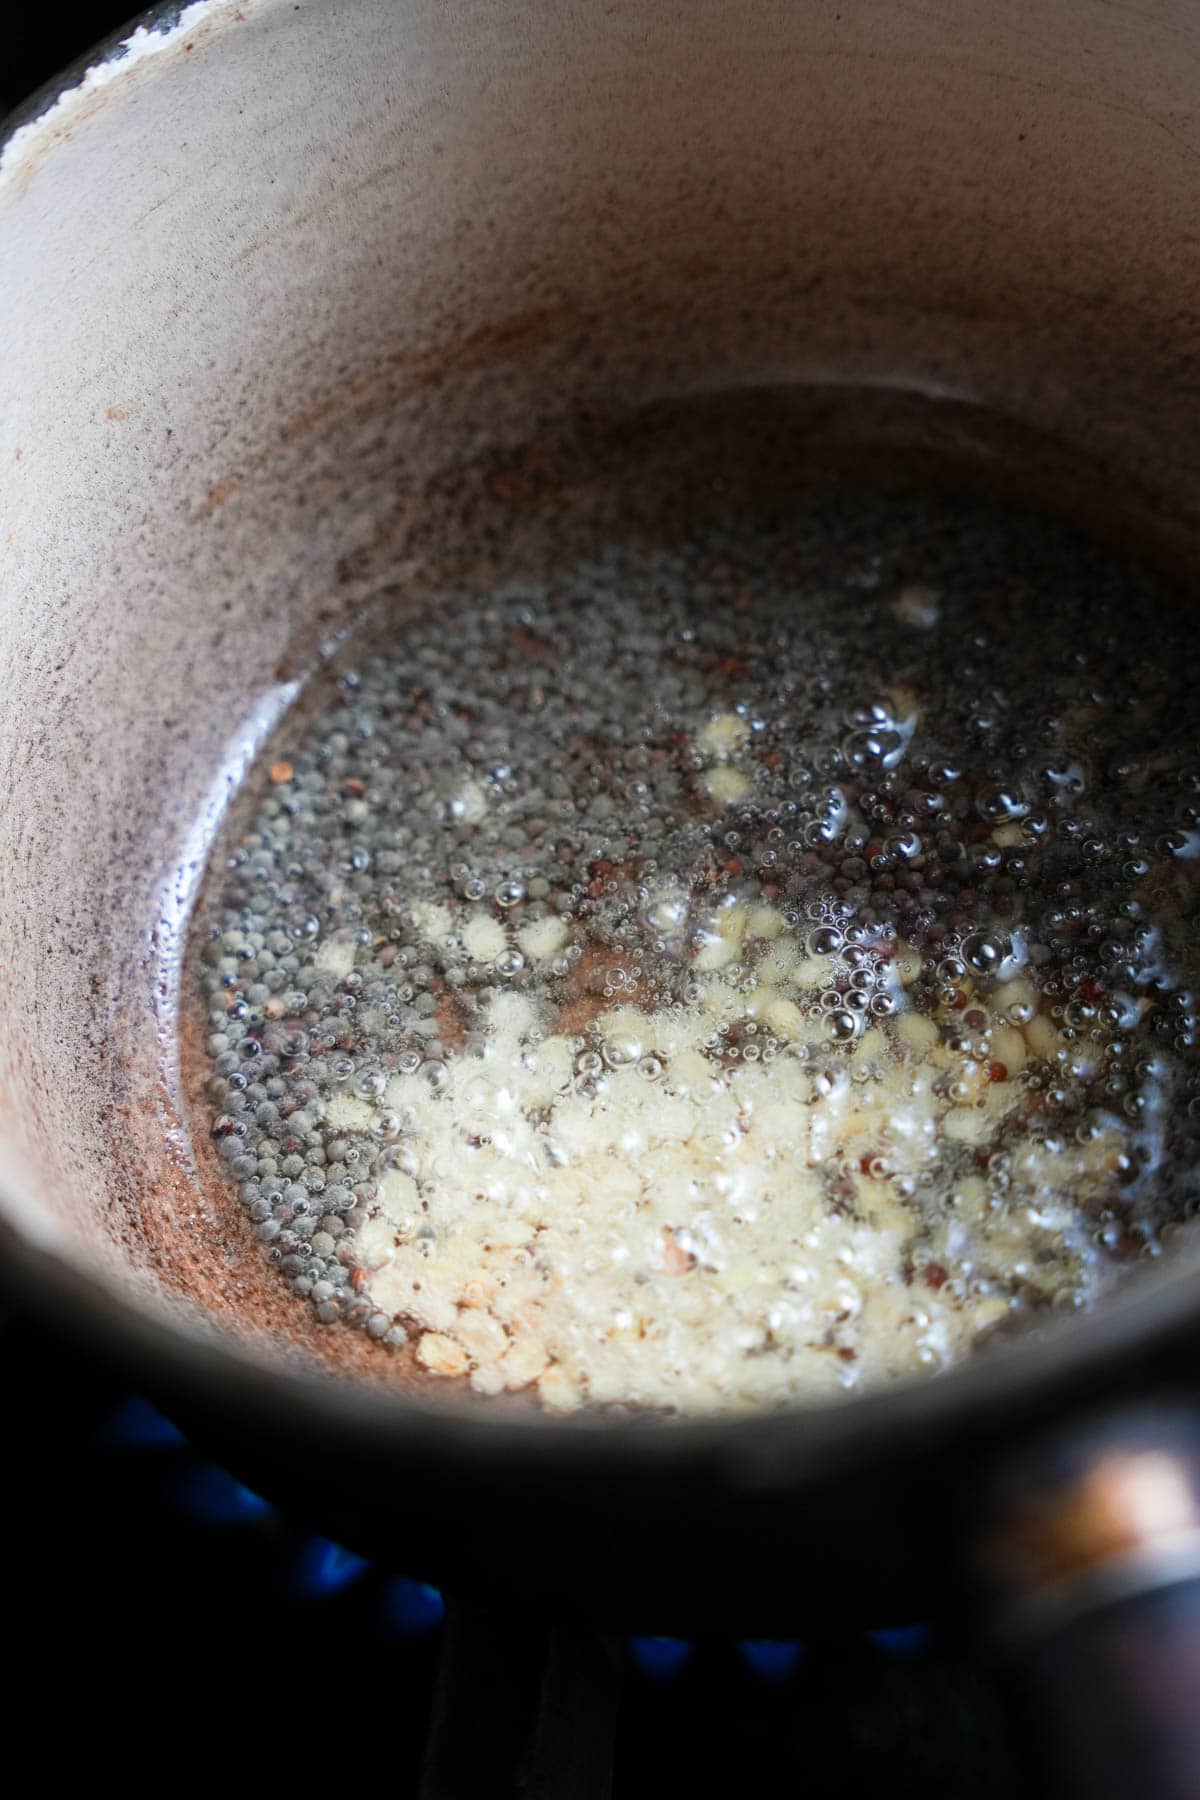 Urad dal and mustard seeds are fried in oil in a small pot for making the tadka.